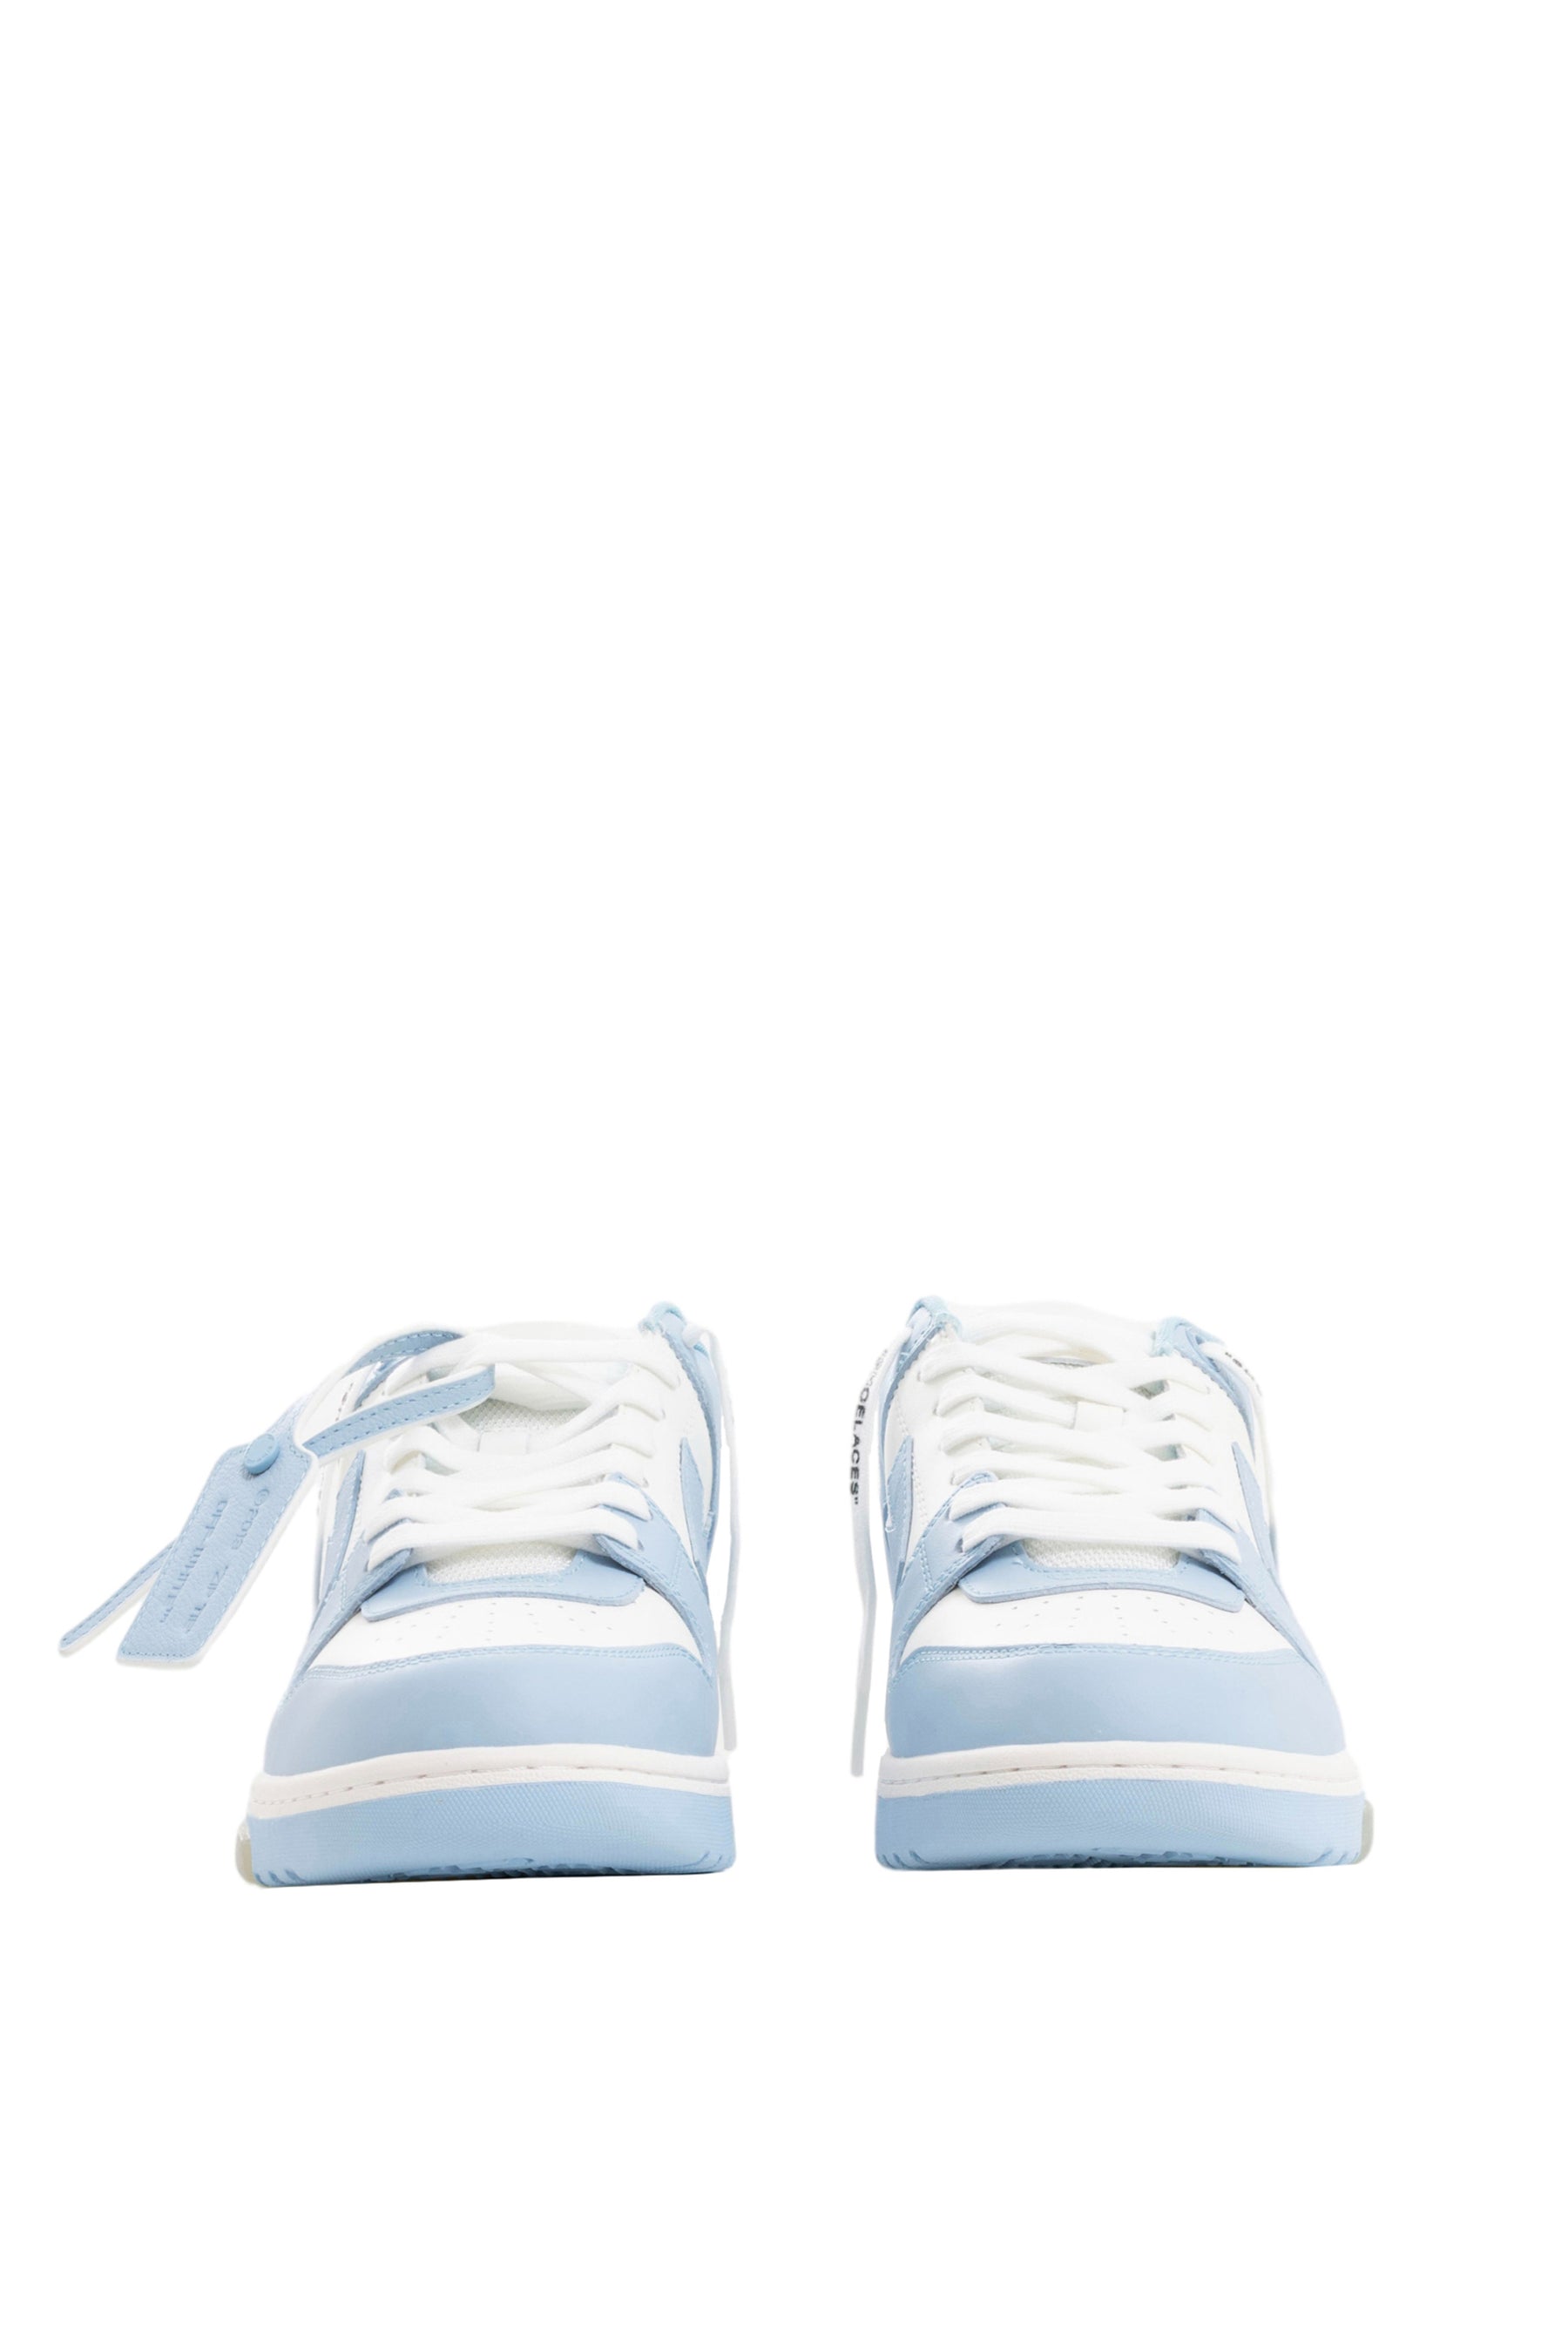 OUT OFF OFFICE CALF LEATHER / WHT LBLU